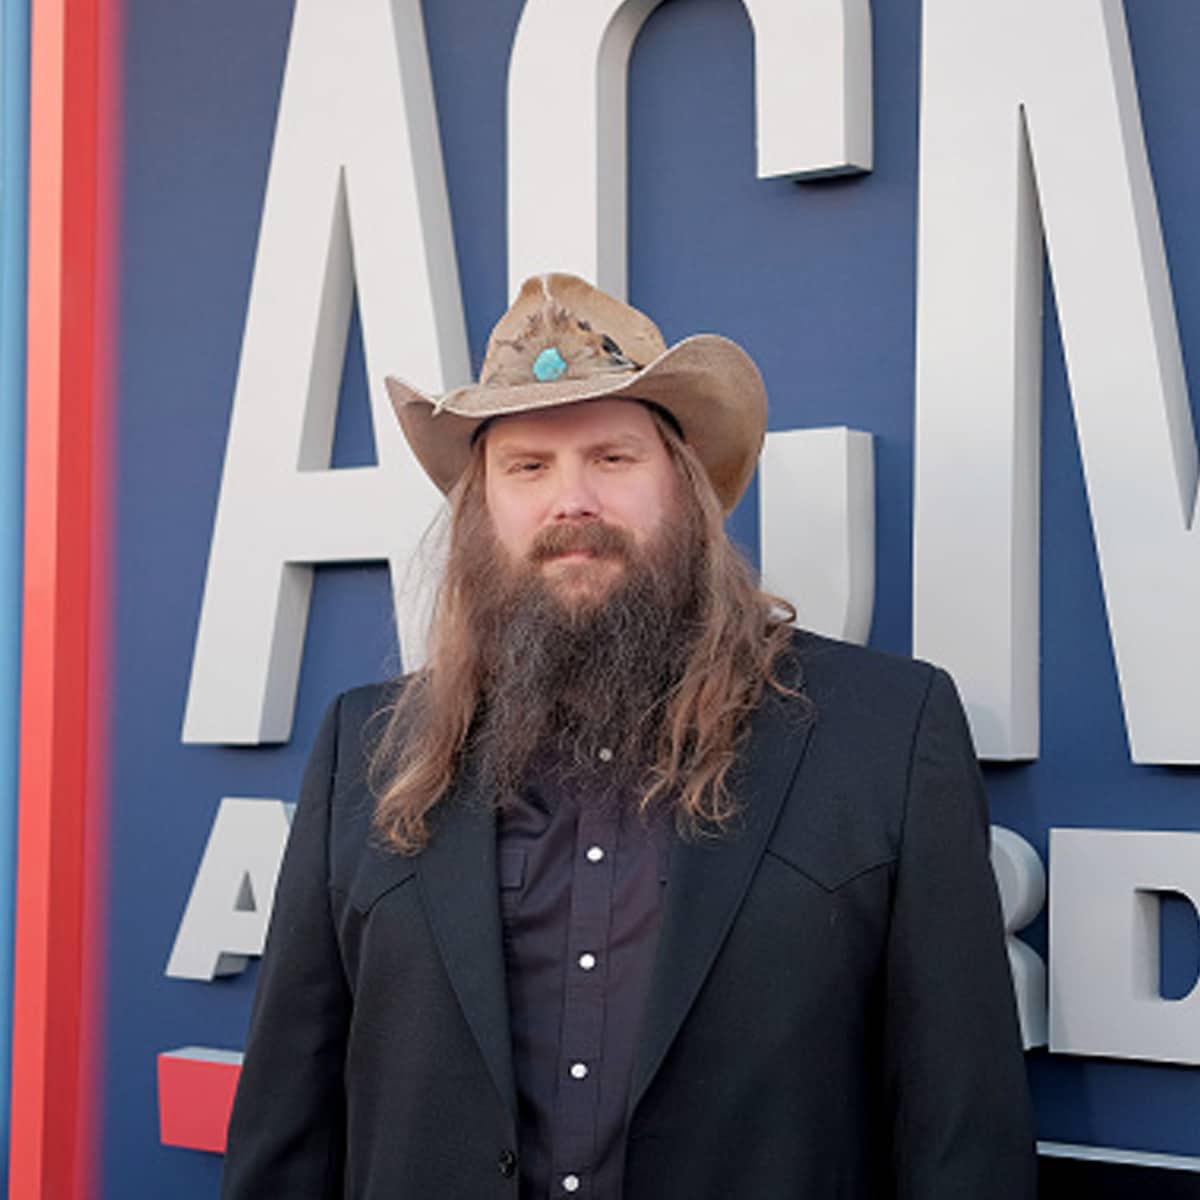 singer christ stapleton attends the academy of country music awards